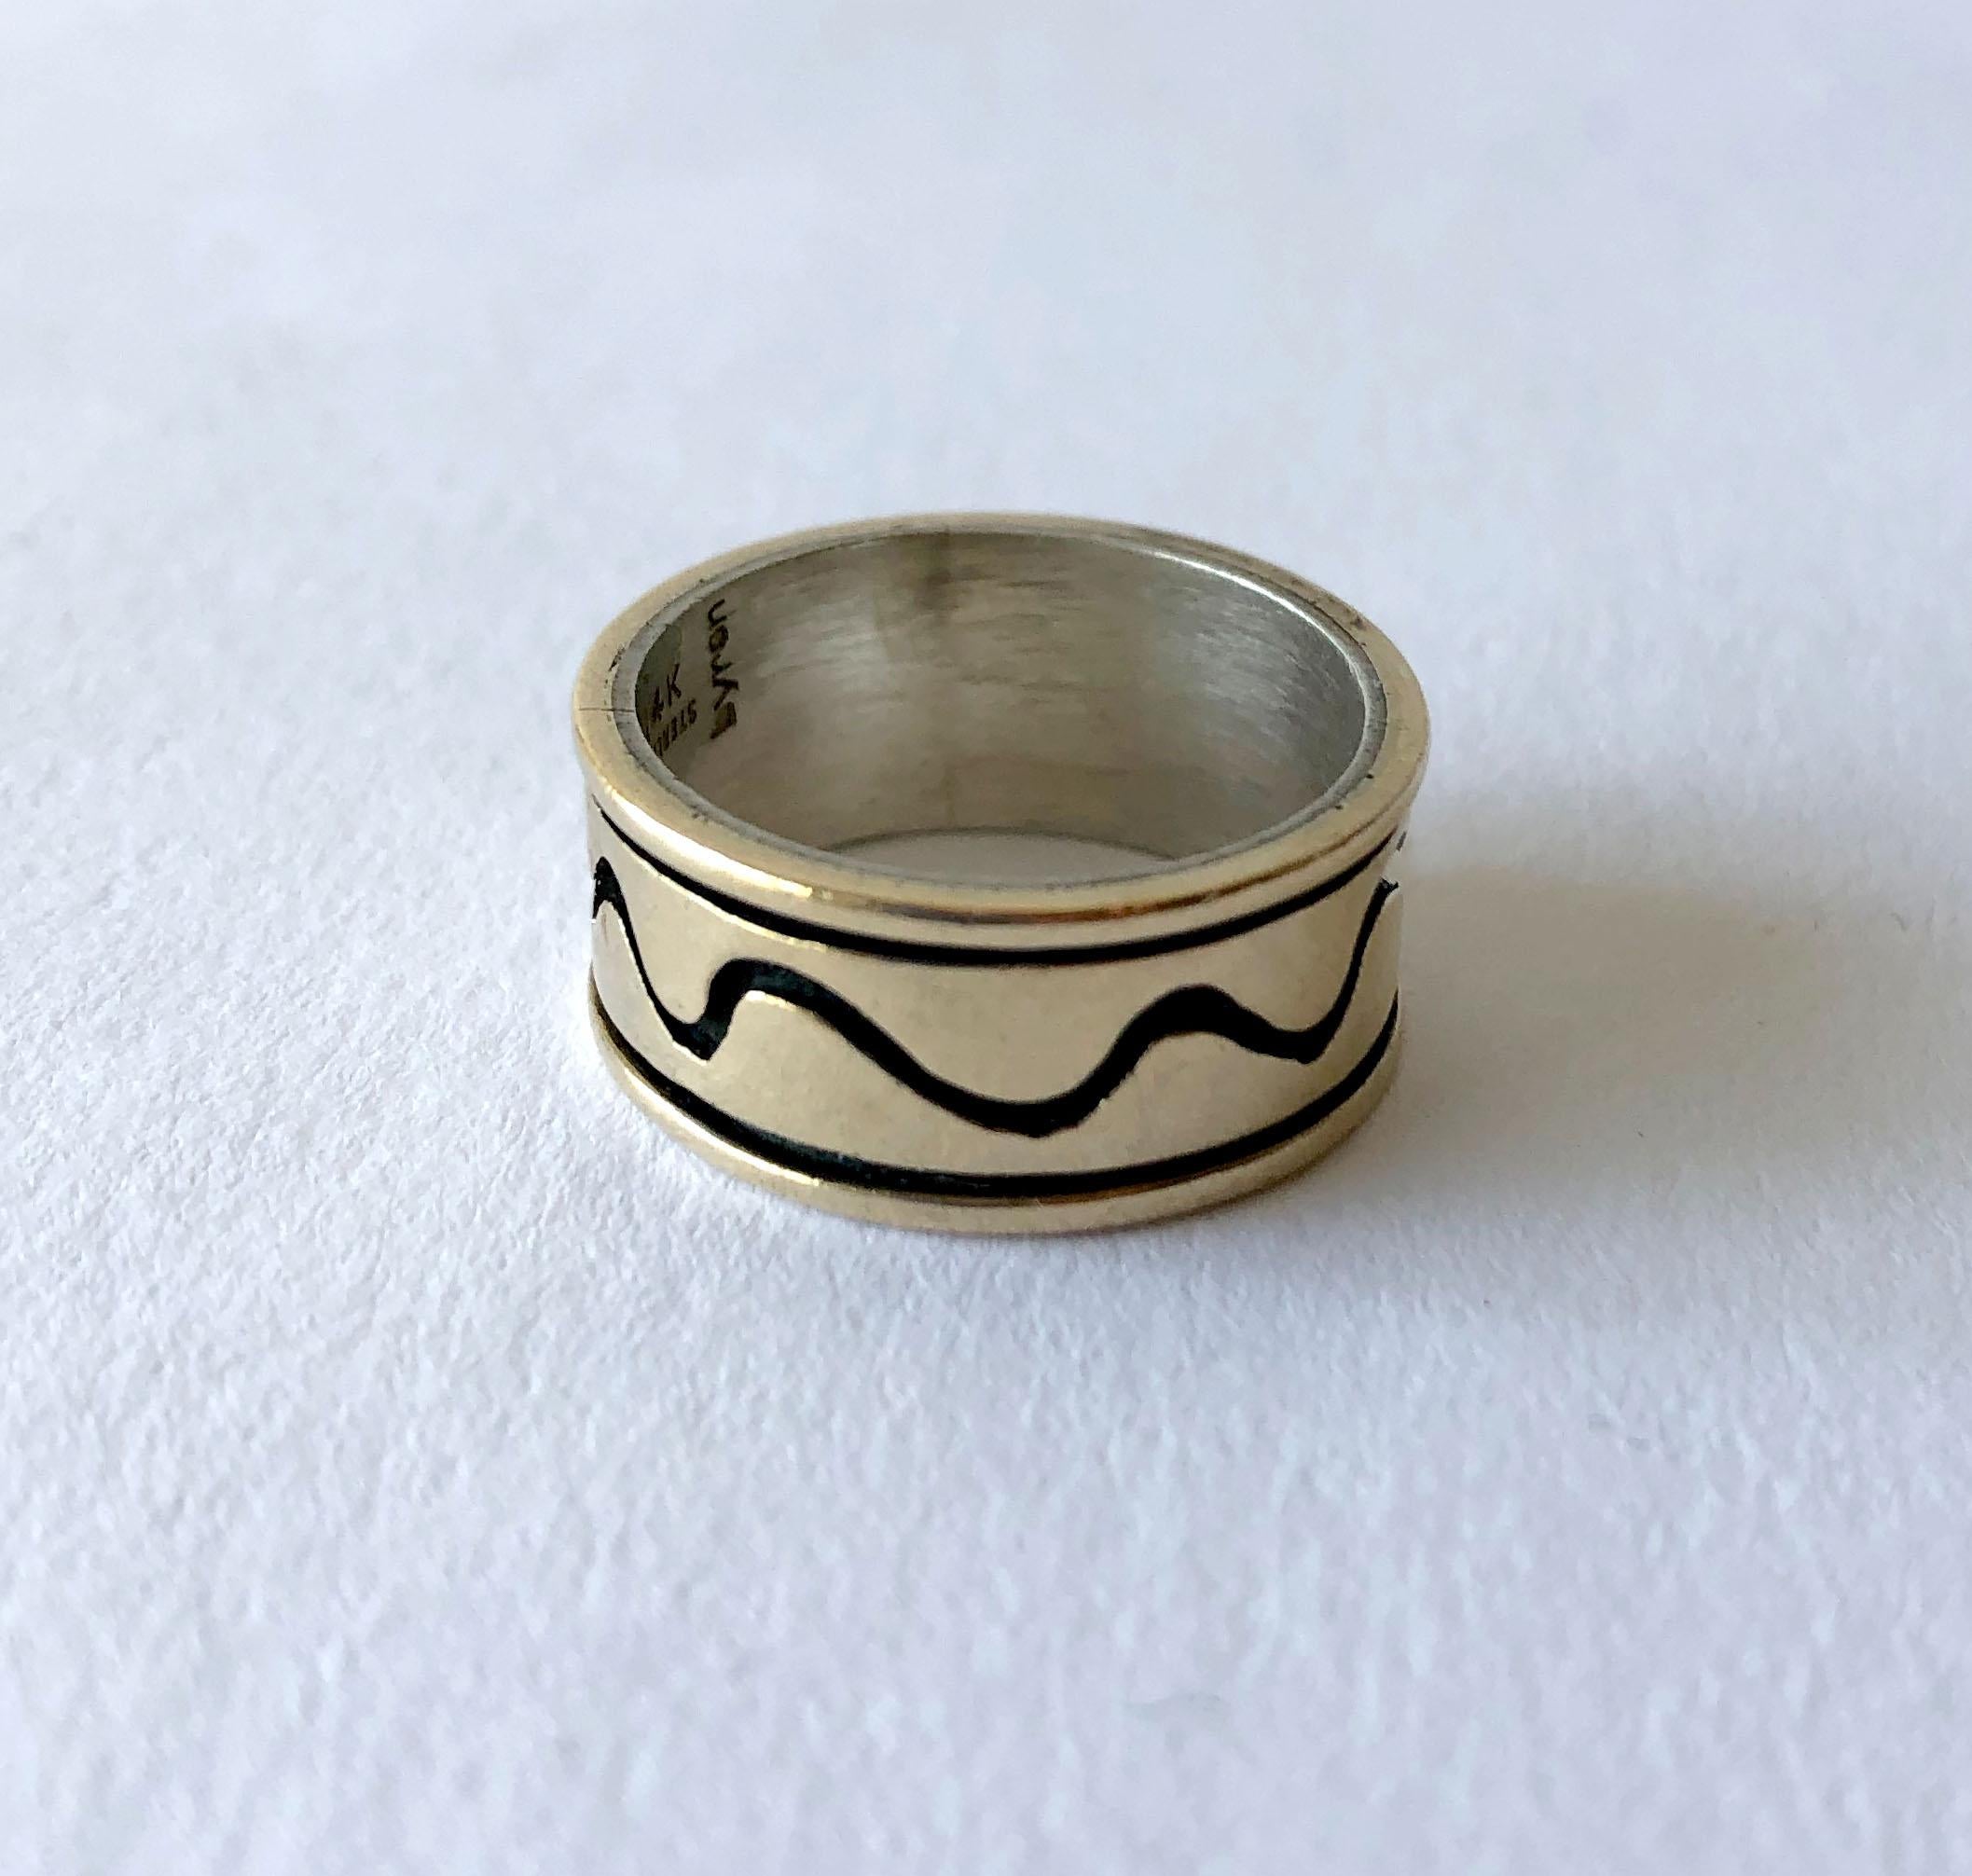 Sterling silver and 14k gold ring with squiggle design signed Byron, circa 1960s.  Ring is a finger size 8 and is 3/8